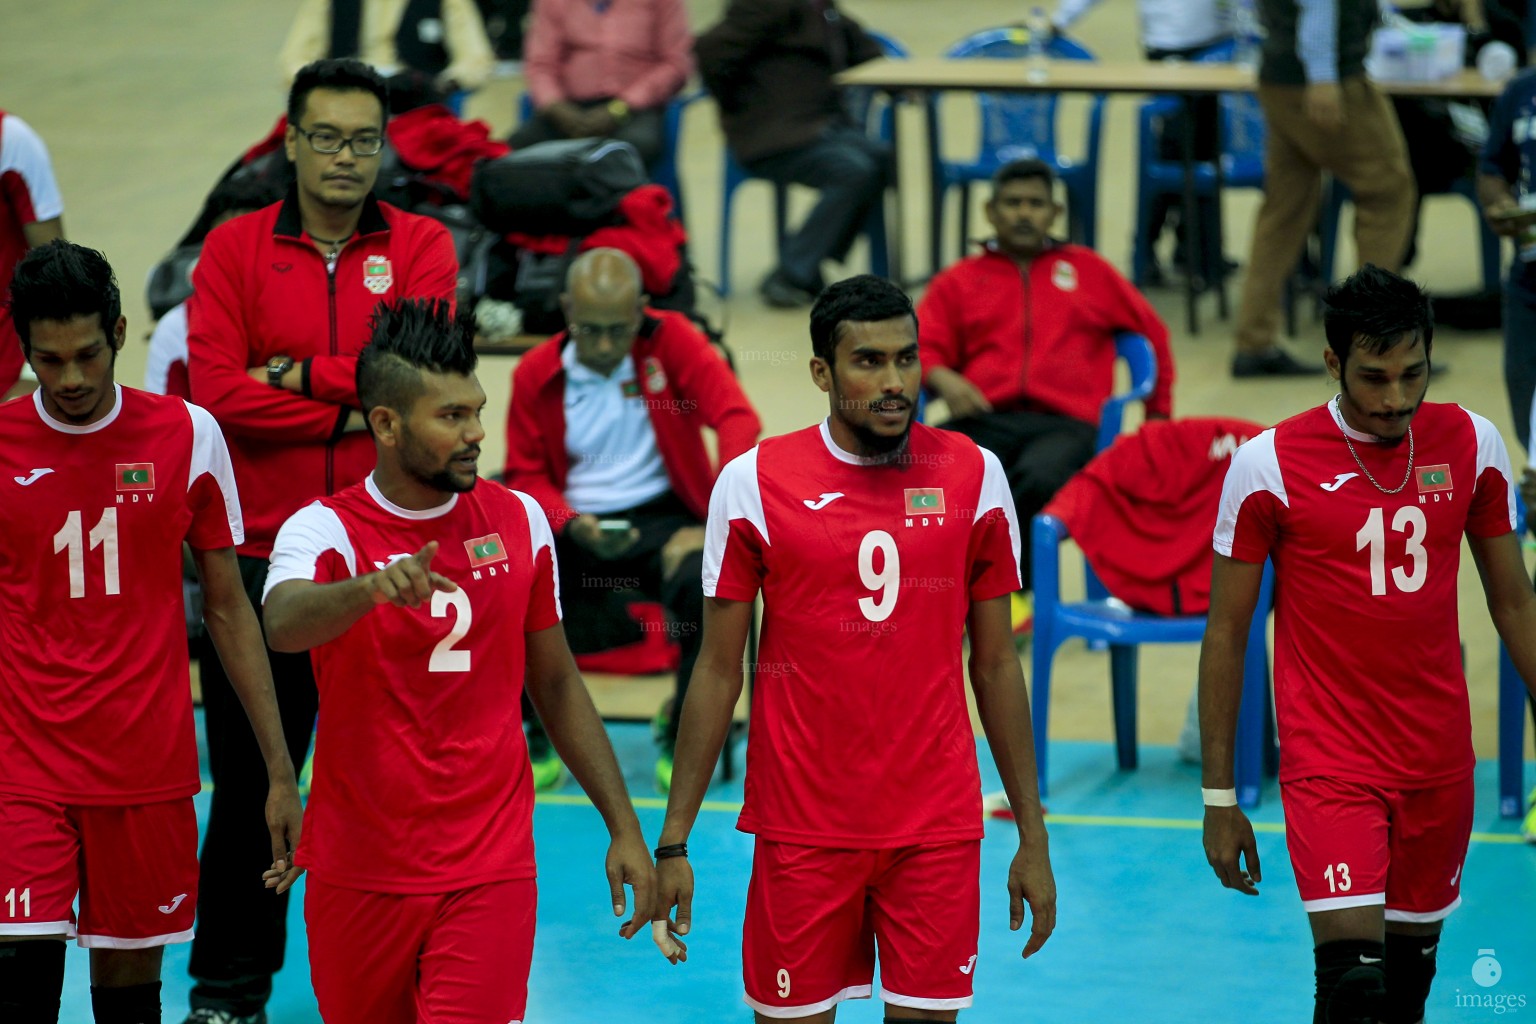 Maldives vs Pakistan in the volleyball event of the South Asian Games in Guwahati, India, Friday, February 5, 2016. (Images.mv Photo: Mohamed Ahsan)